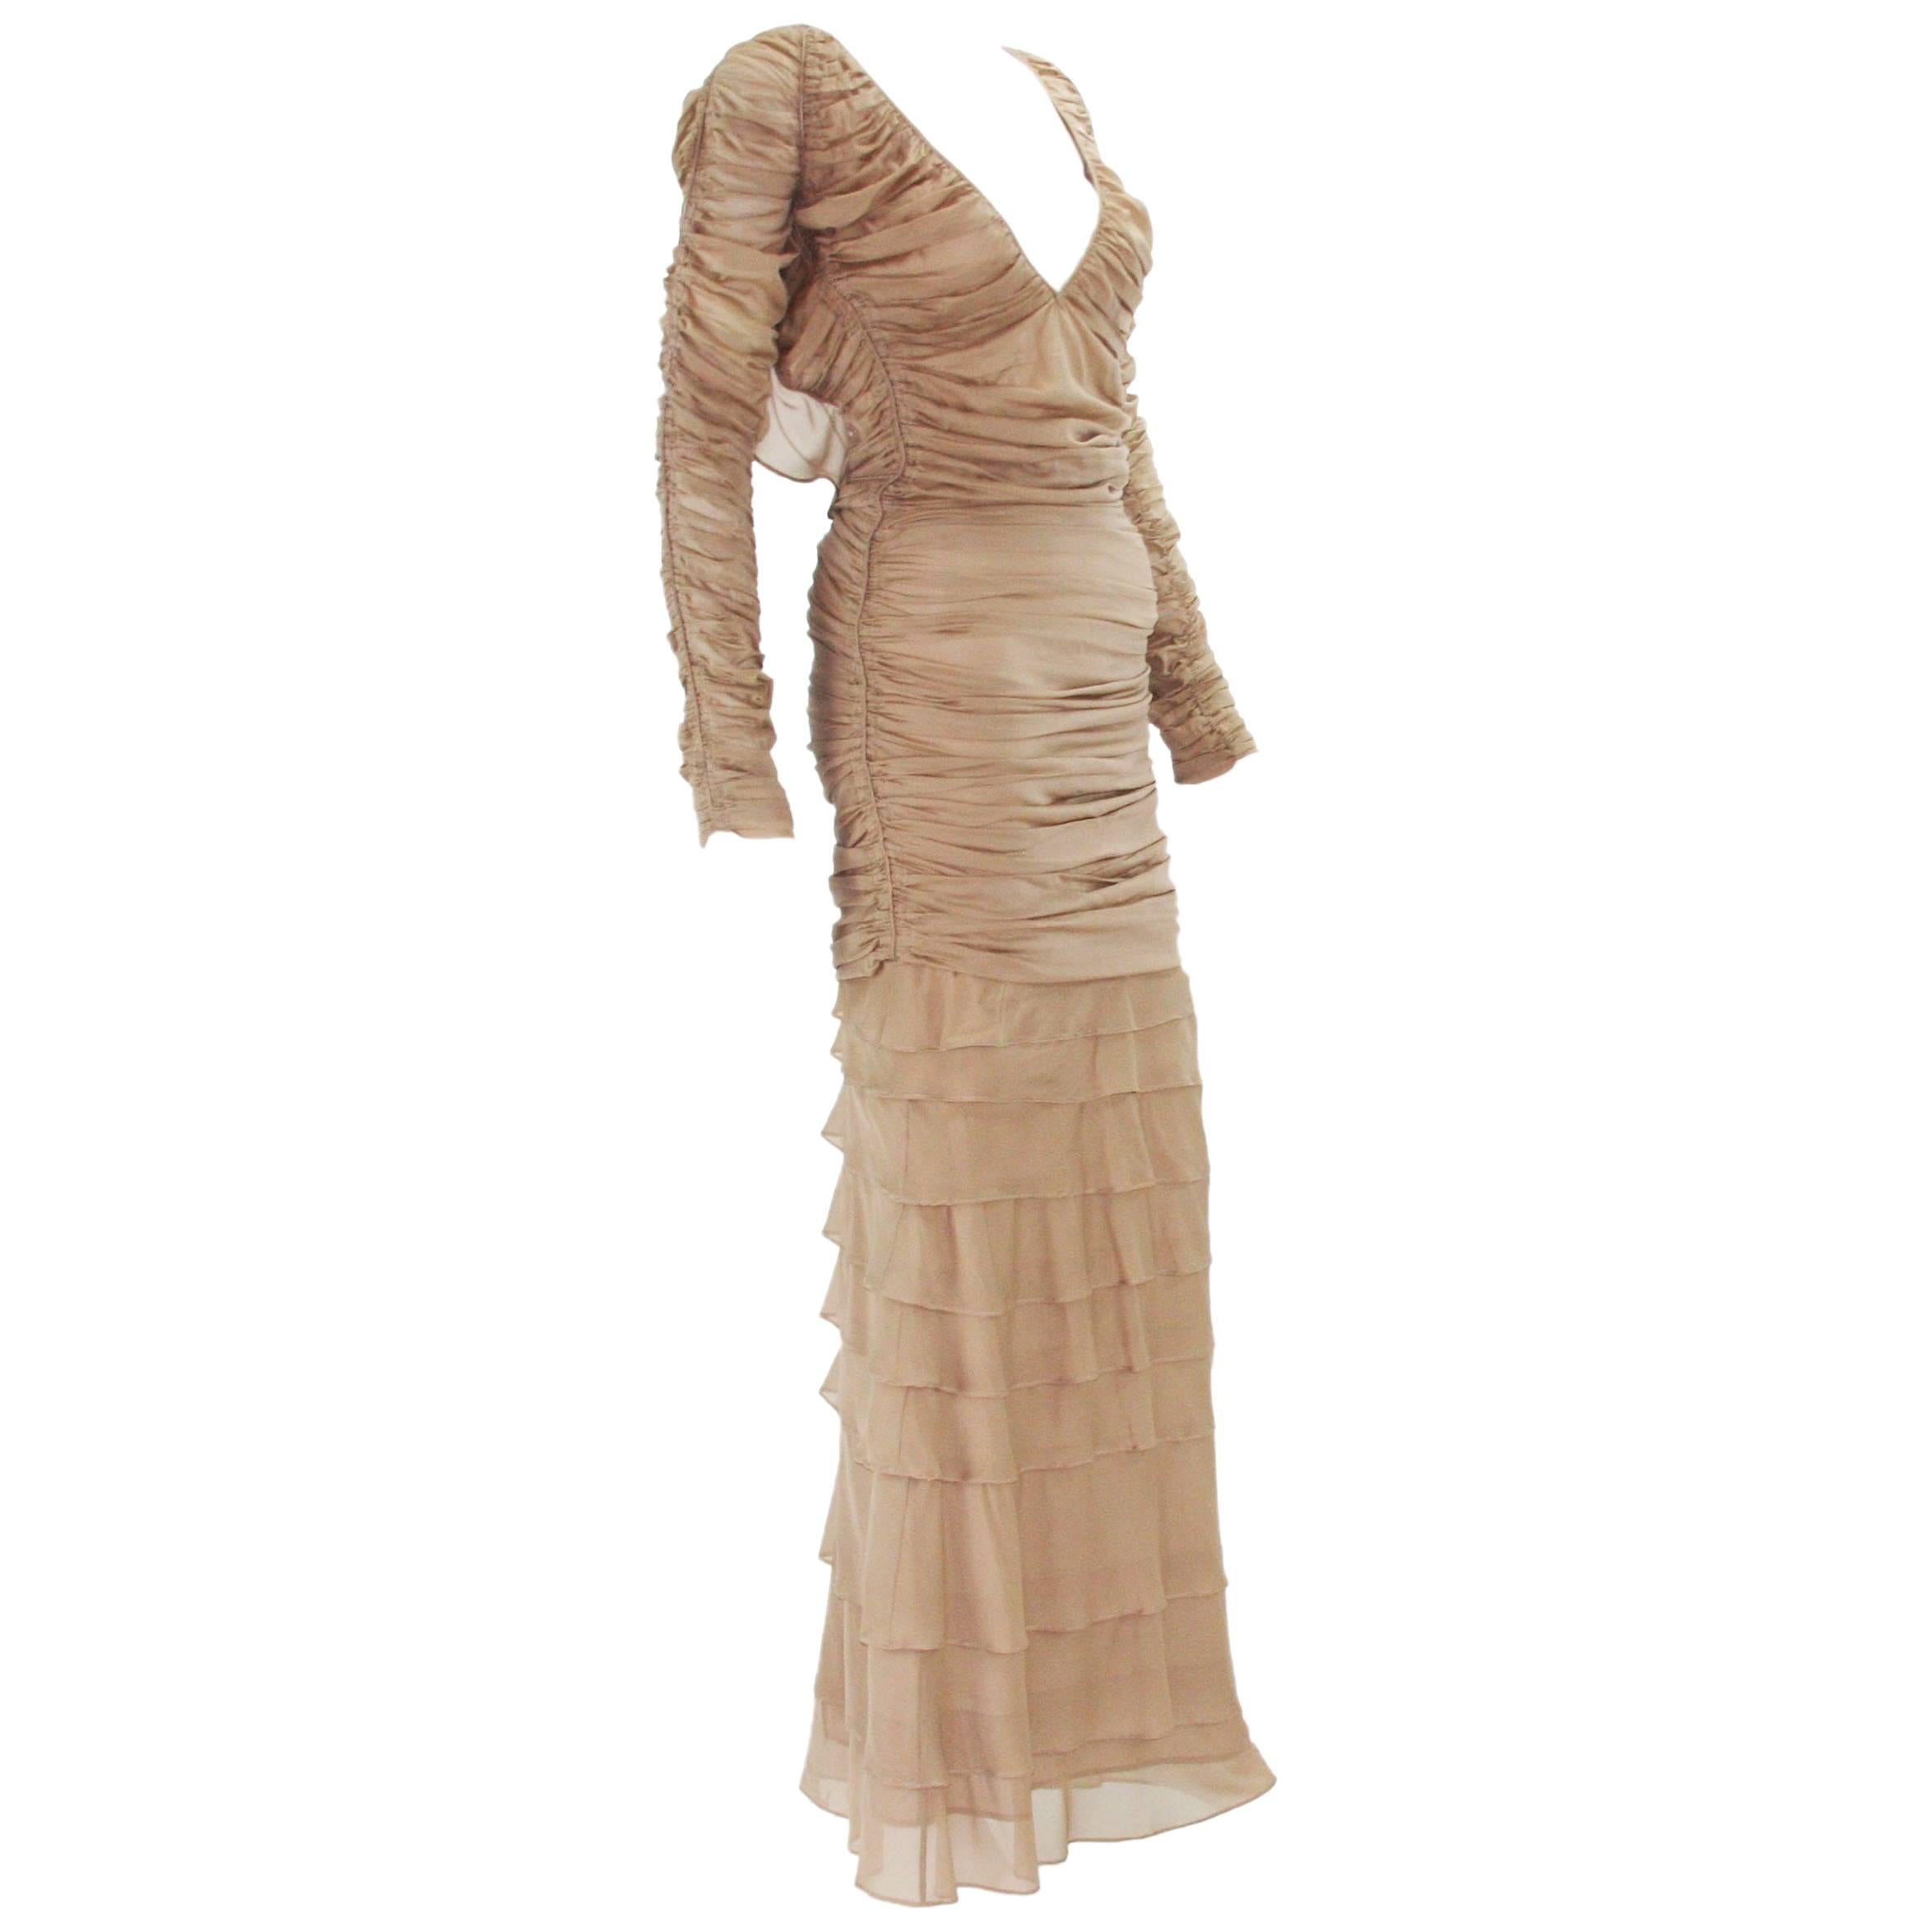 Tom Ford for Gucci S/S 2003 Collection Nude Silk Stretch Open Back Dress Gown S